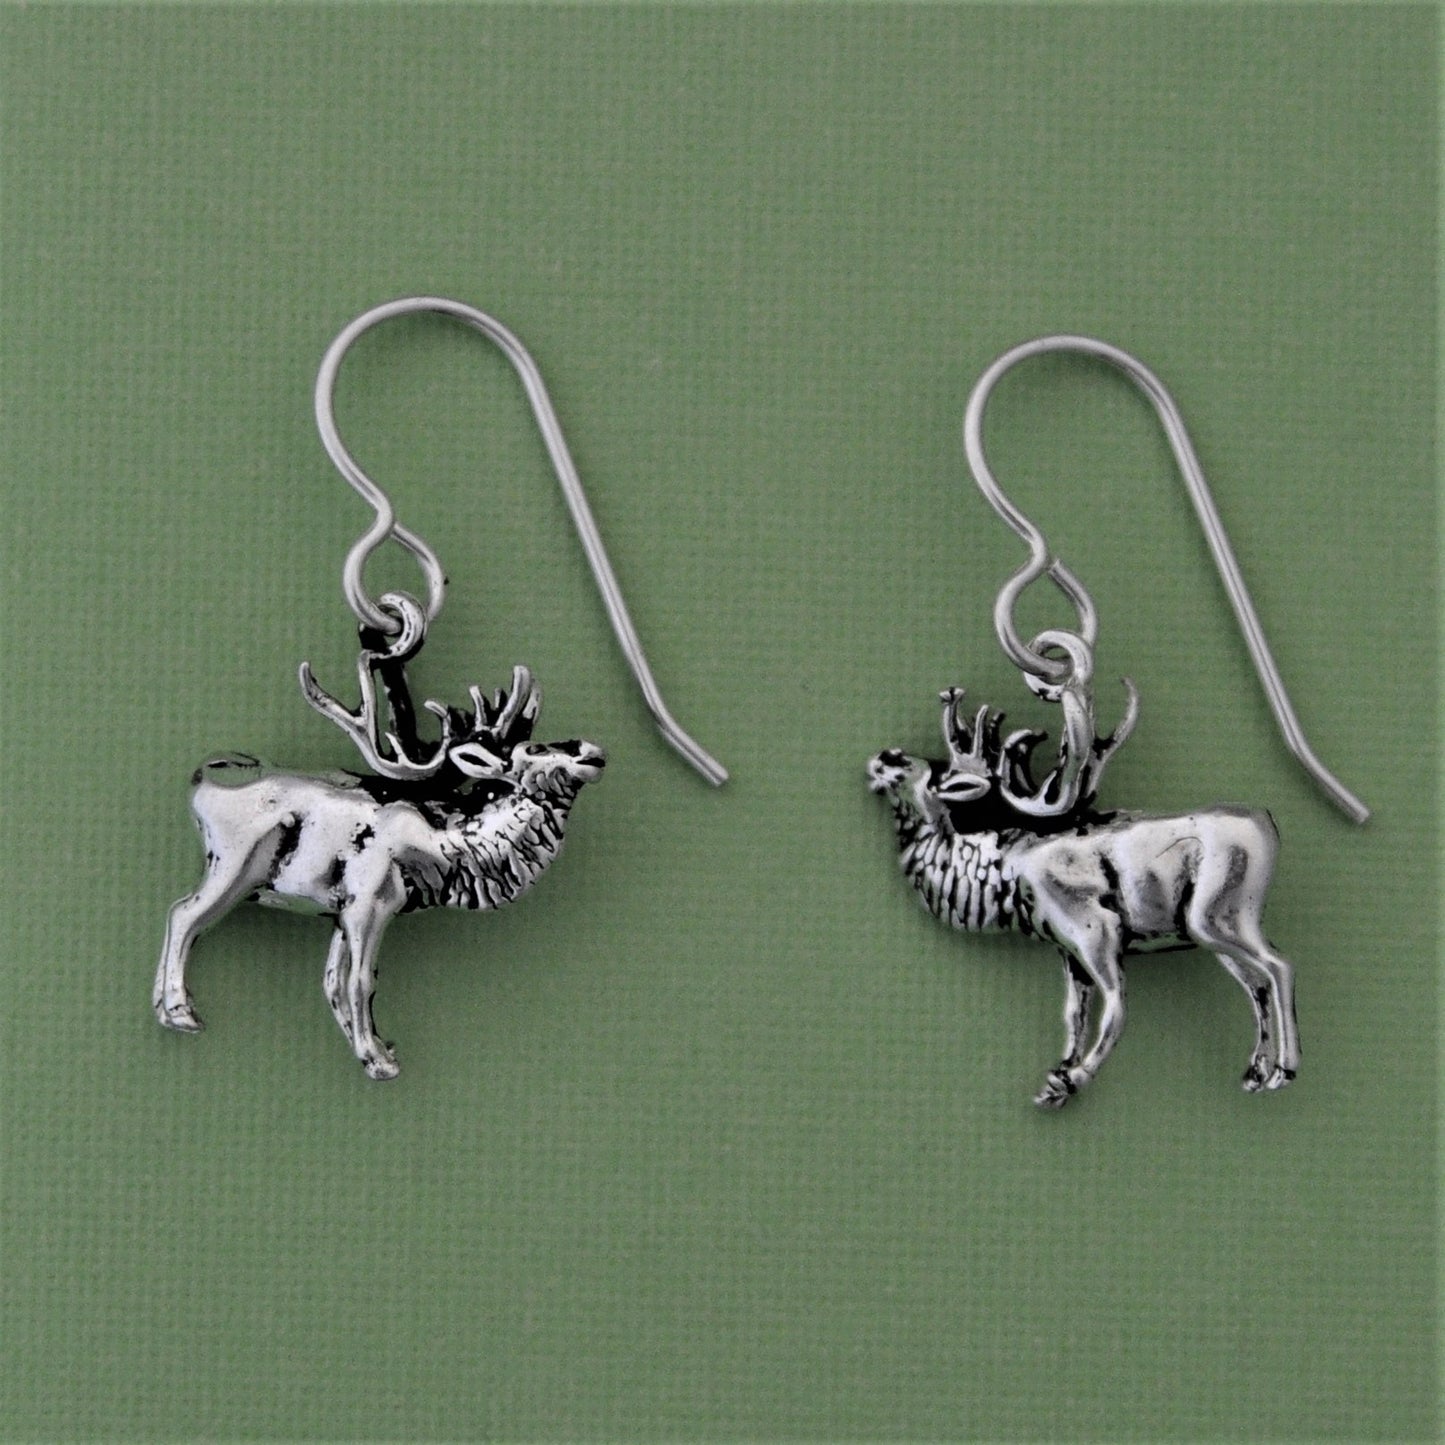 Elk Earrings, Sterling Silver with sterling silver ear wires, Gift for Women, Yellowstone Species, Intricately Detailed